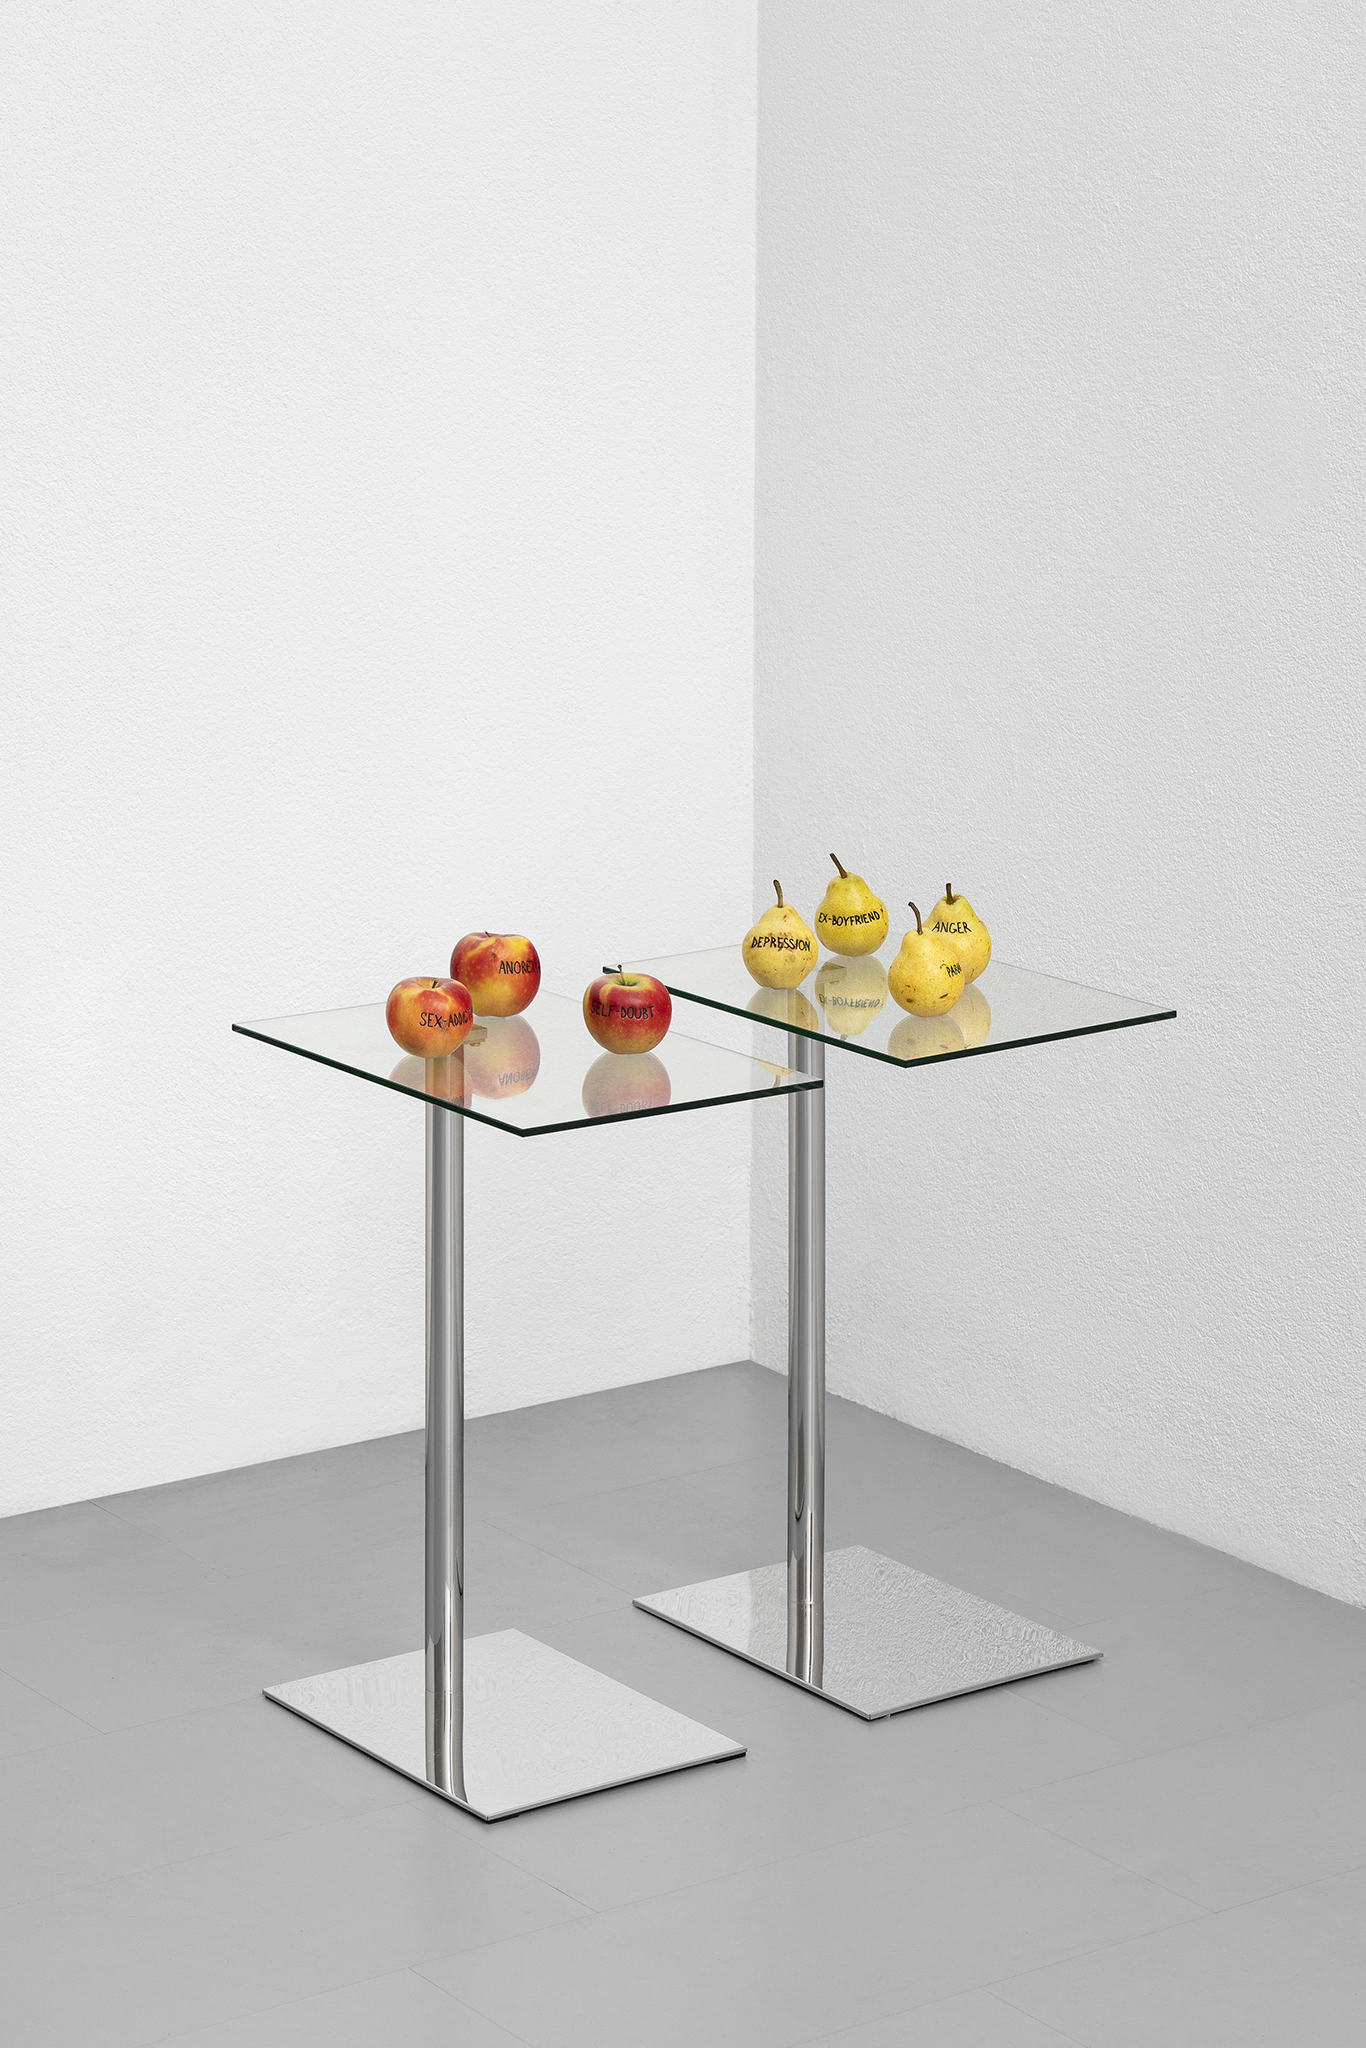 Paolo Bufalini, Self-doubt, Sex-addiction, Anorexia. Glass and steel table, tattooed Kanzi apples, 75x34x50cm; Anger, Ex-boyfriend, Depression, Paranoia, 2023. Glass and steel table, tattooed Kaiser pears, 75x34x50cm. Courtesy of the Artist and La Rada. 